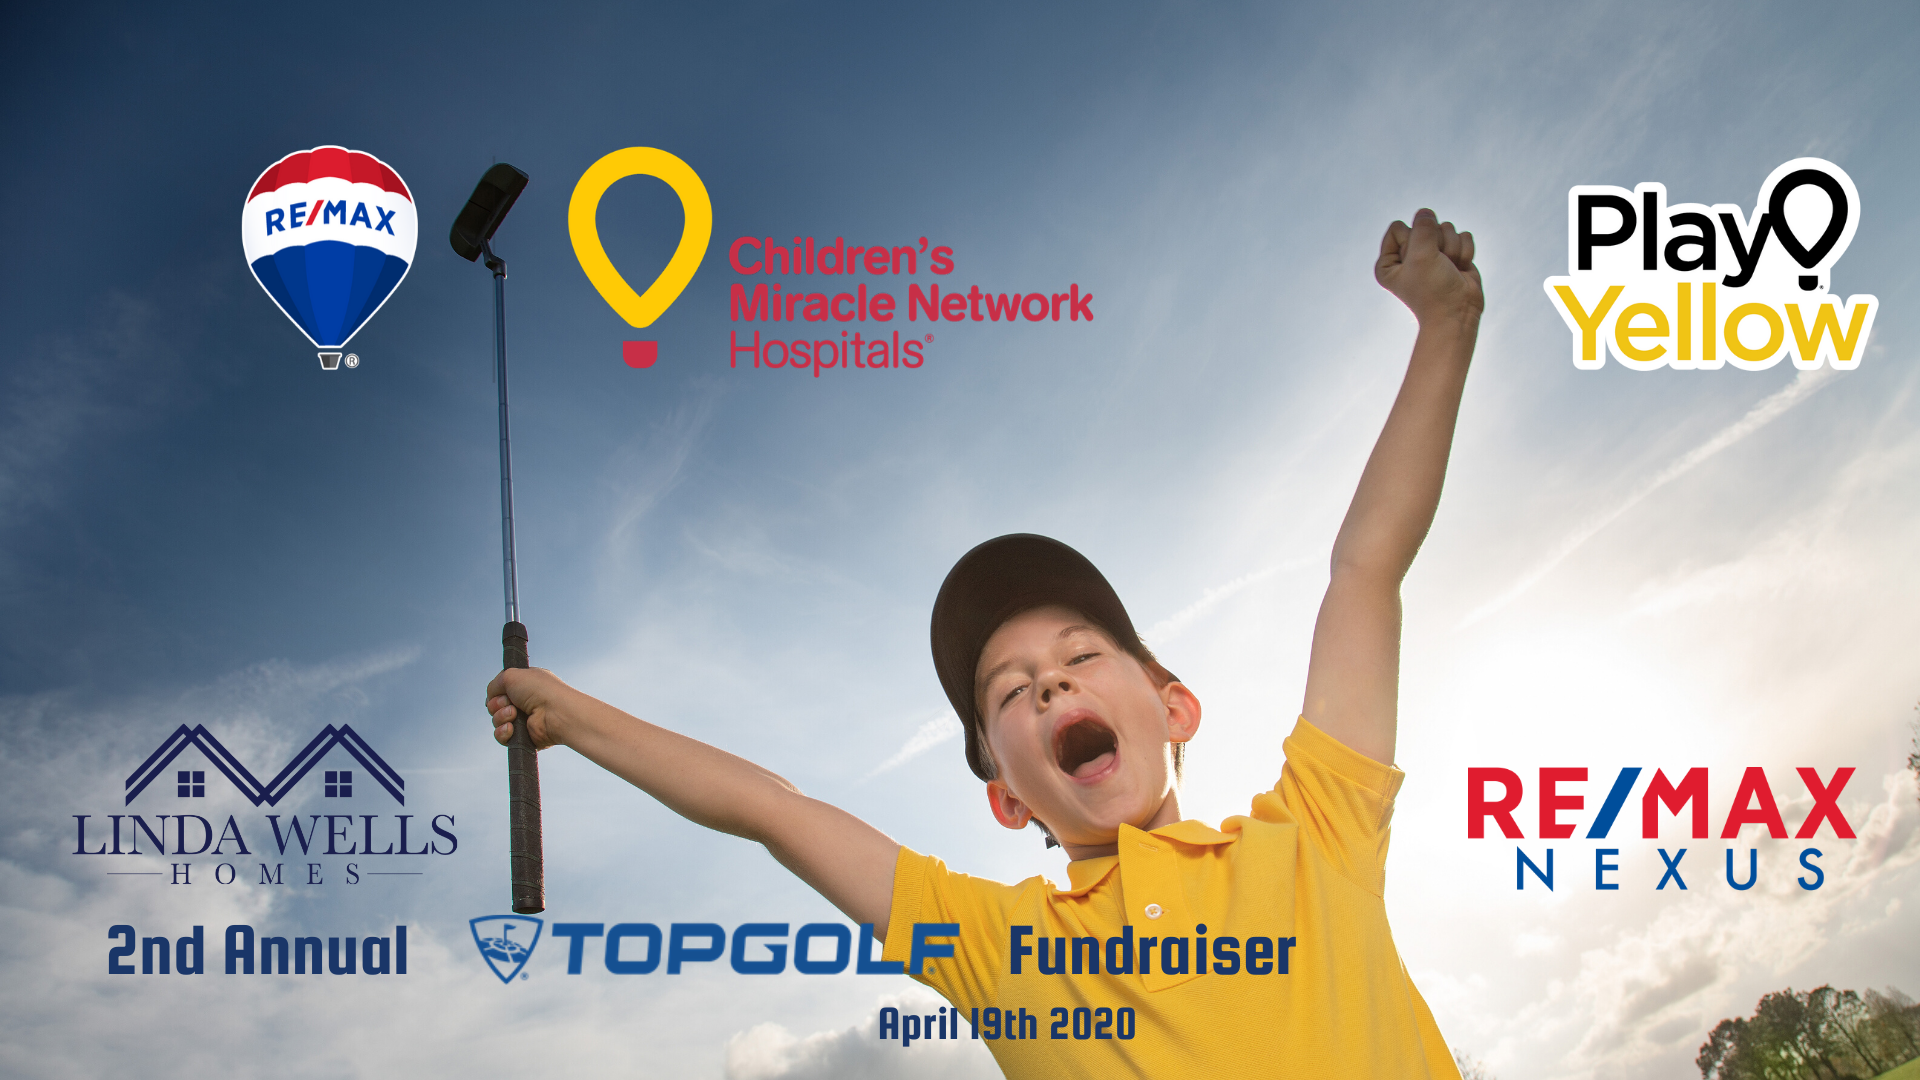 2nd Annual Topgolf Fundraiser for Childrens Miracle Network